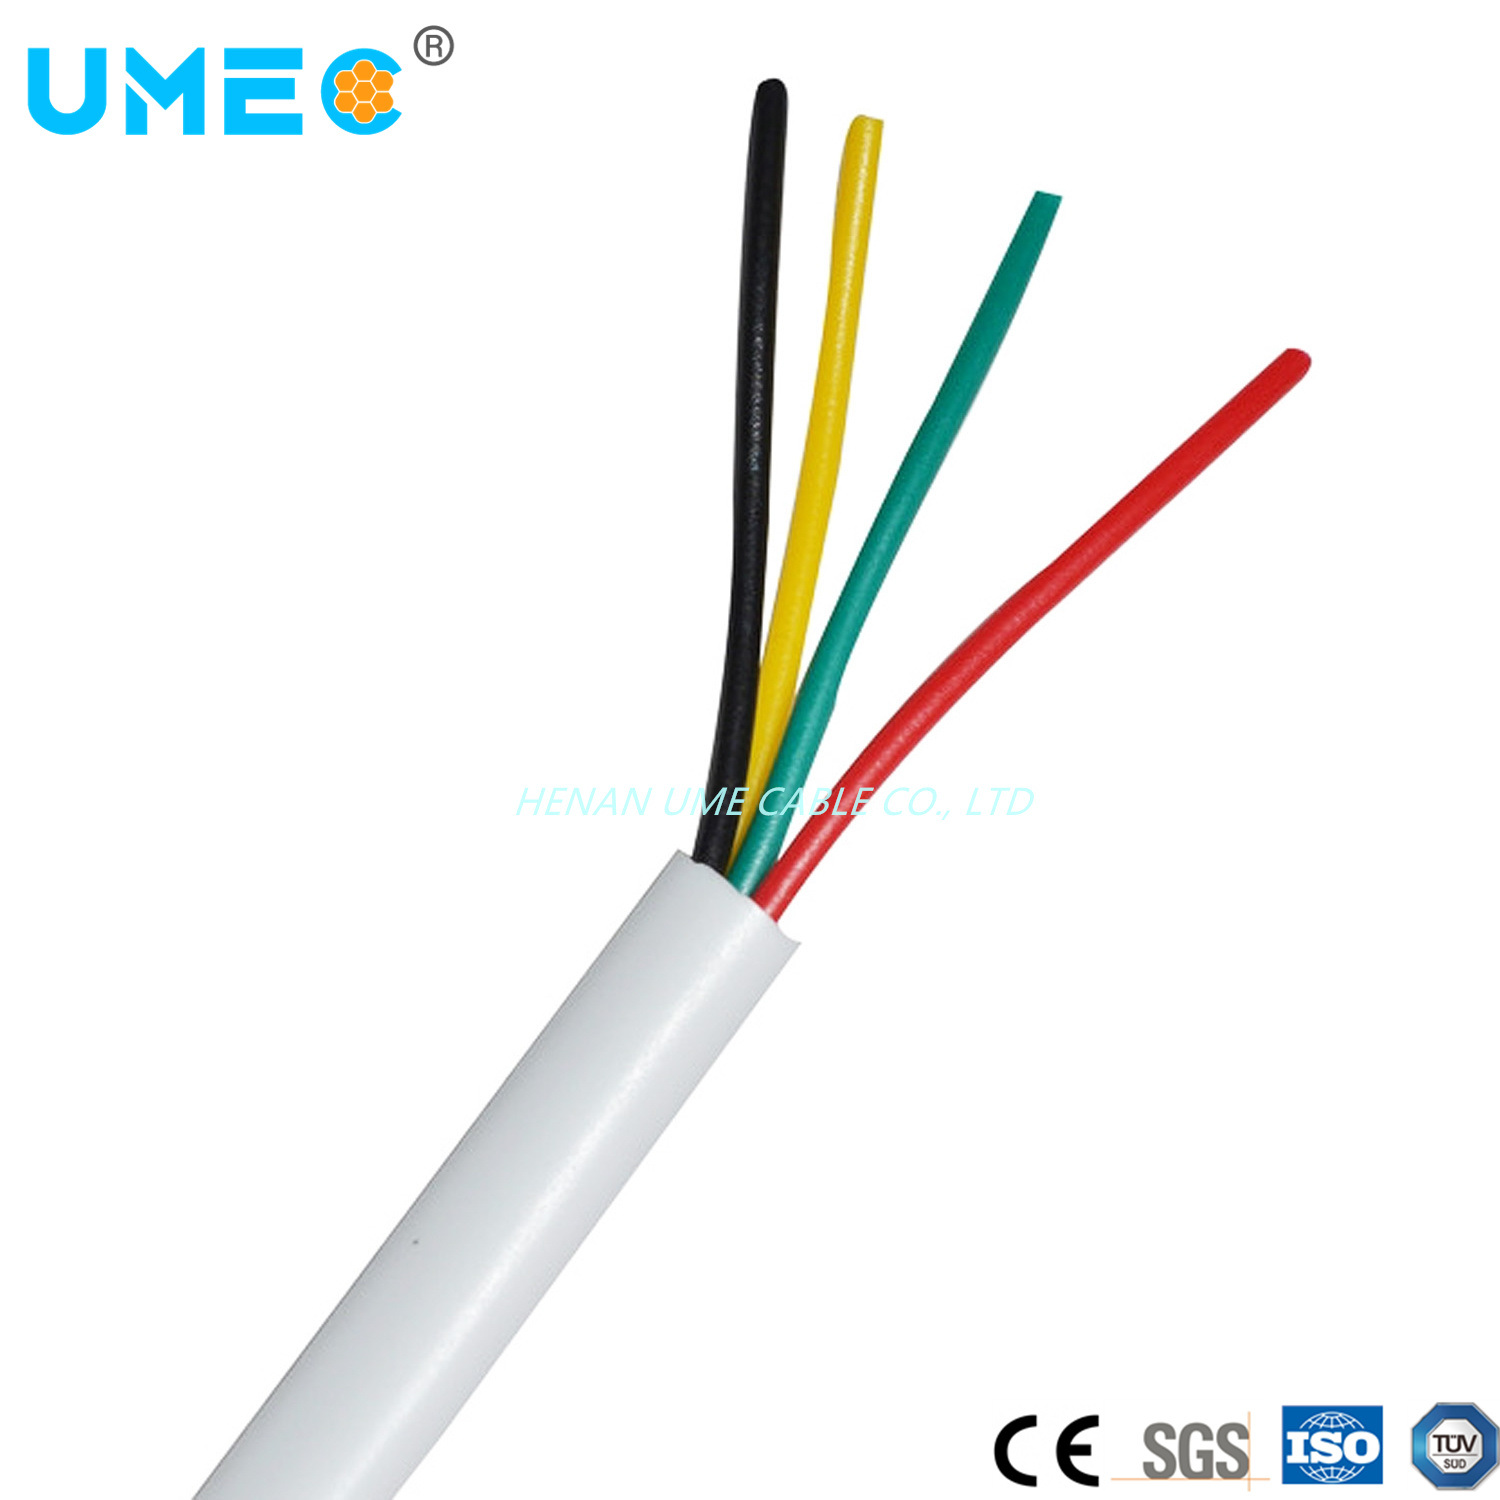 IEC60227 Rvv Multi-Core 2 3 4 Cores Copper Wires H05VV-F Myym Flexible Electrical Cable